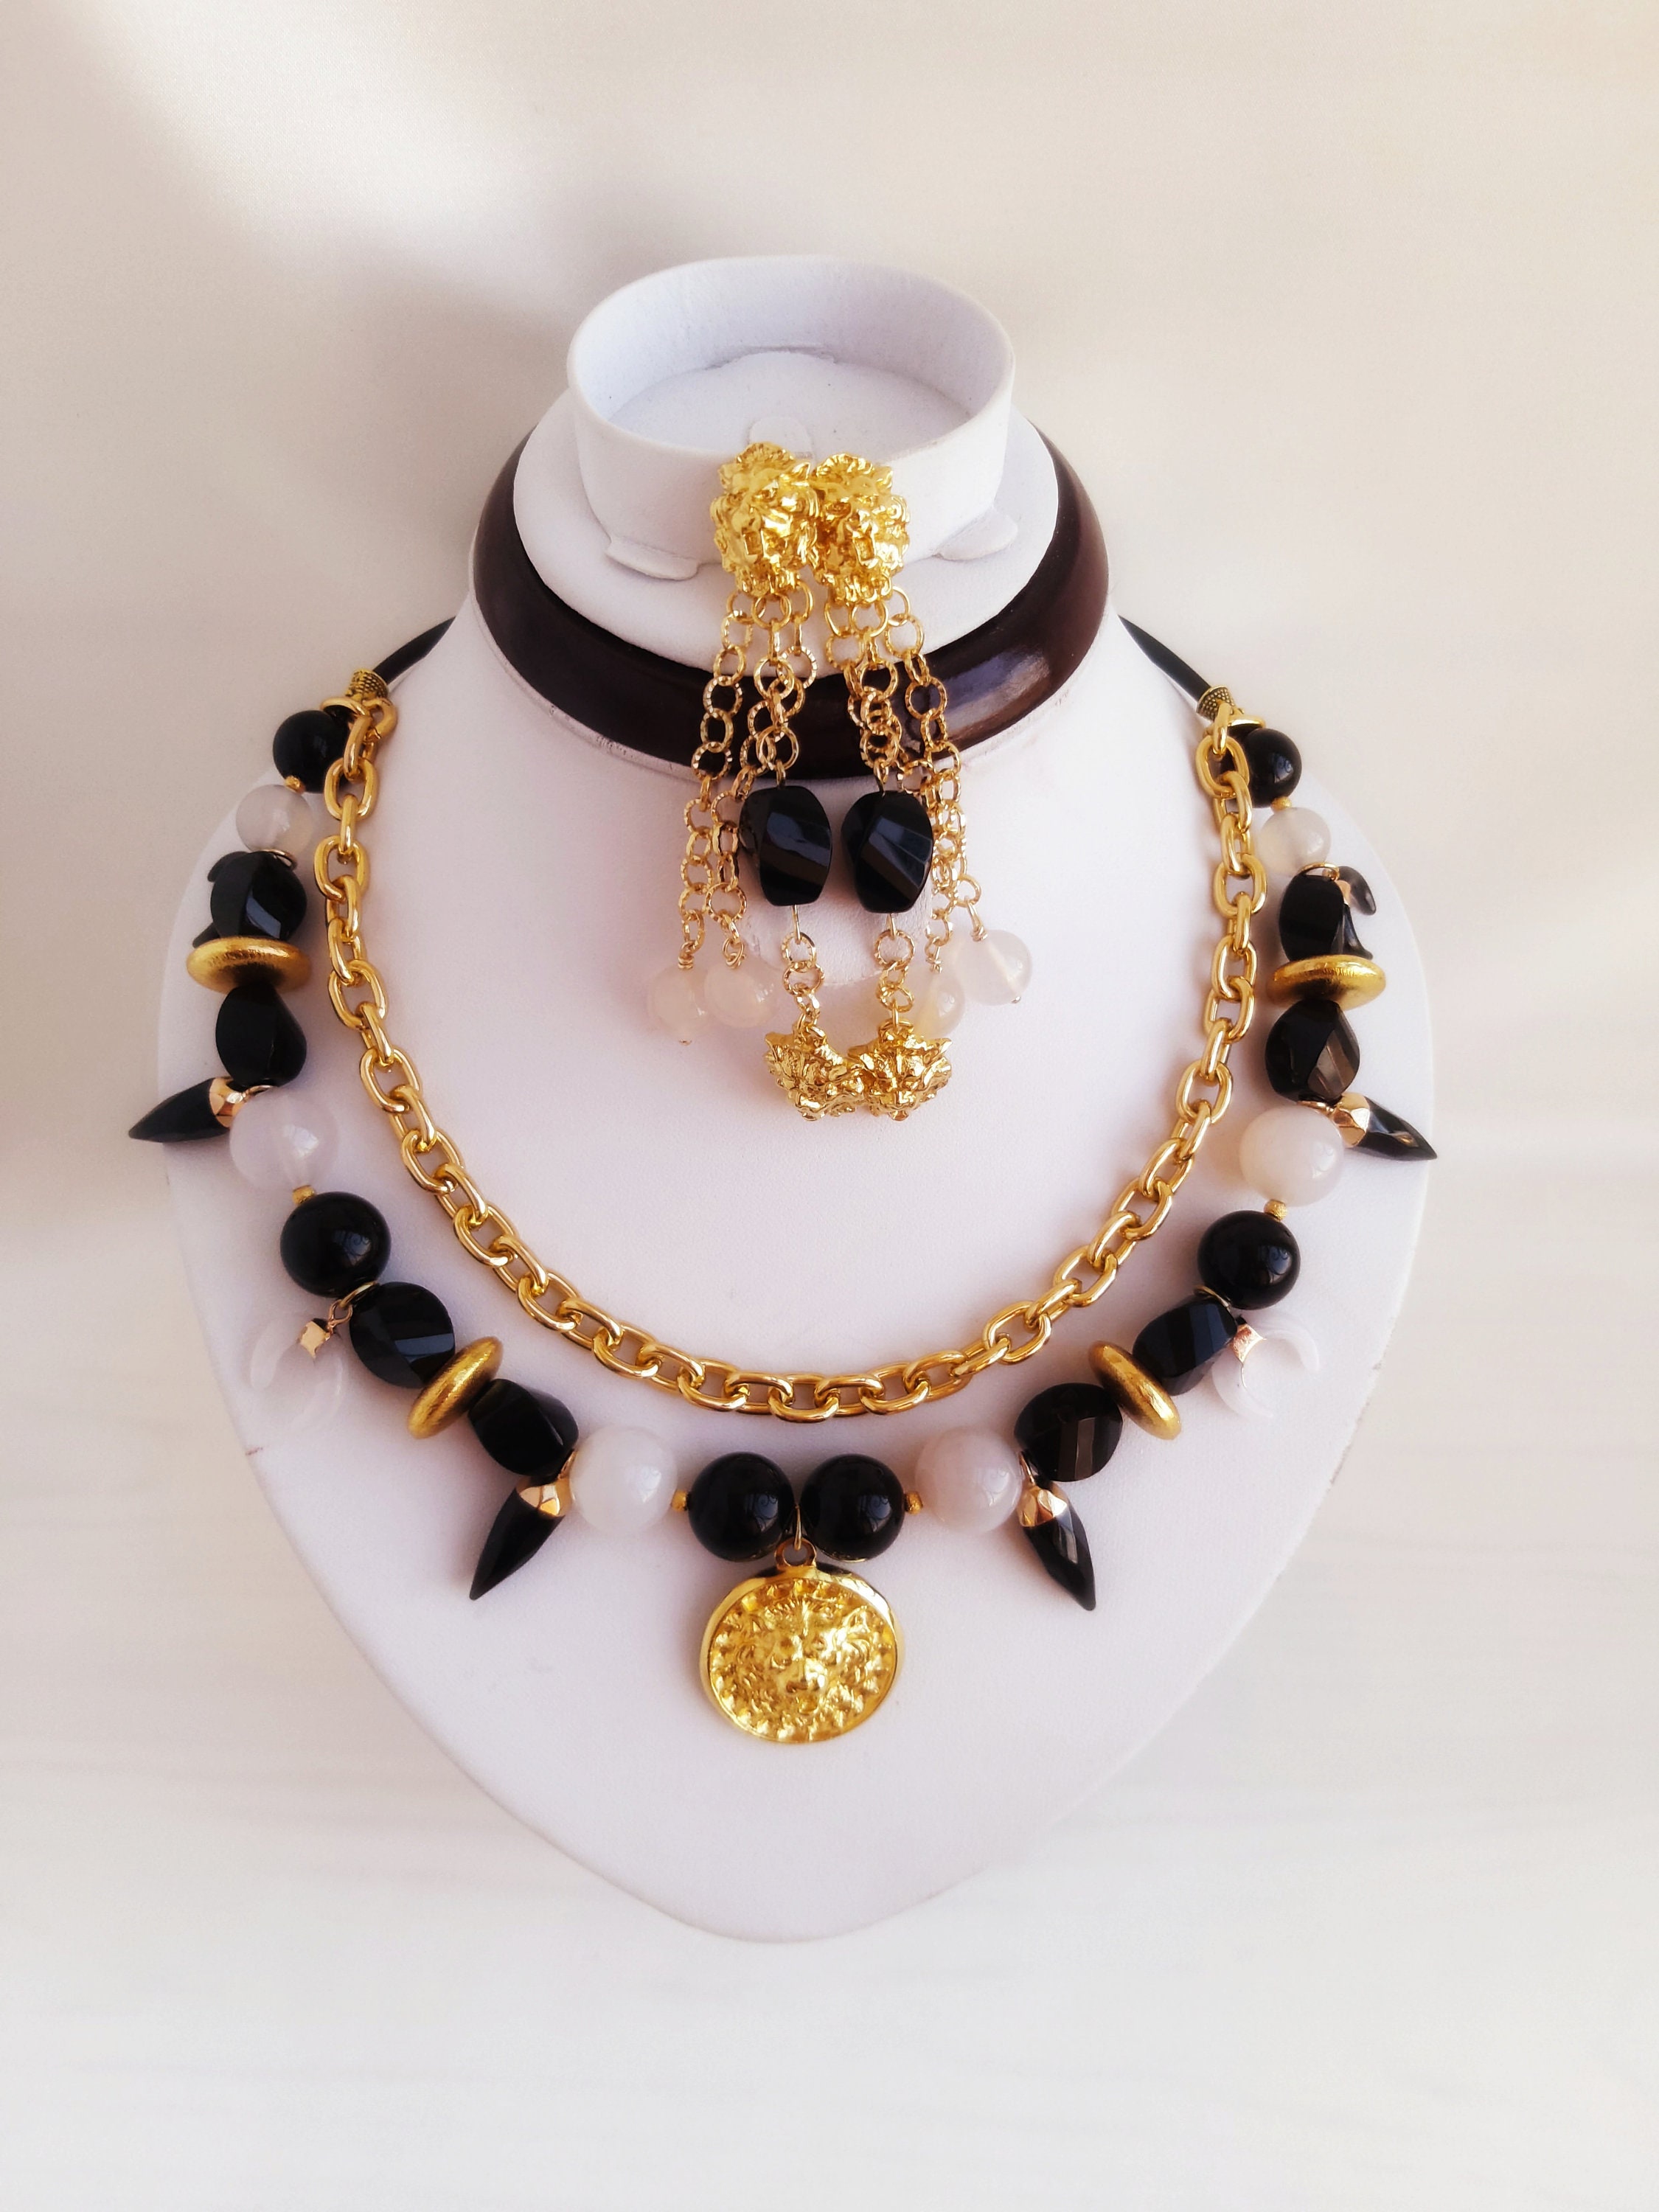 Beaded Jewelry Trends in 2023 – SWCreations